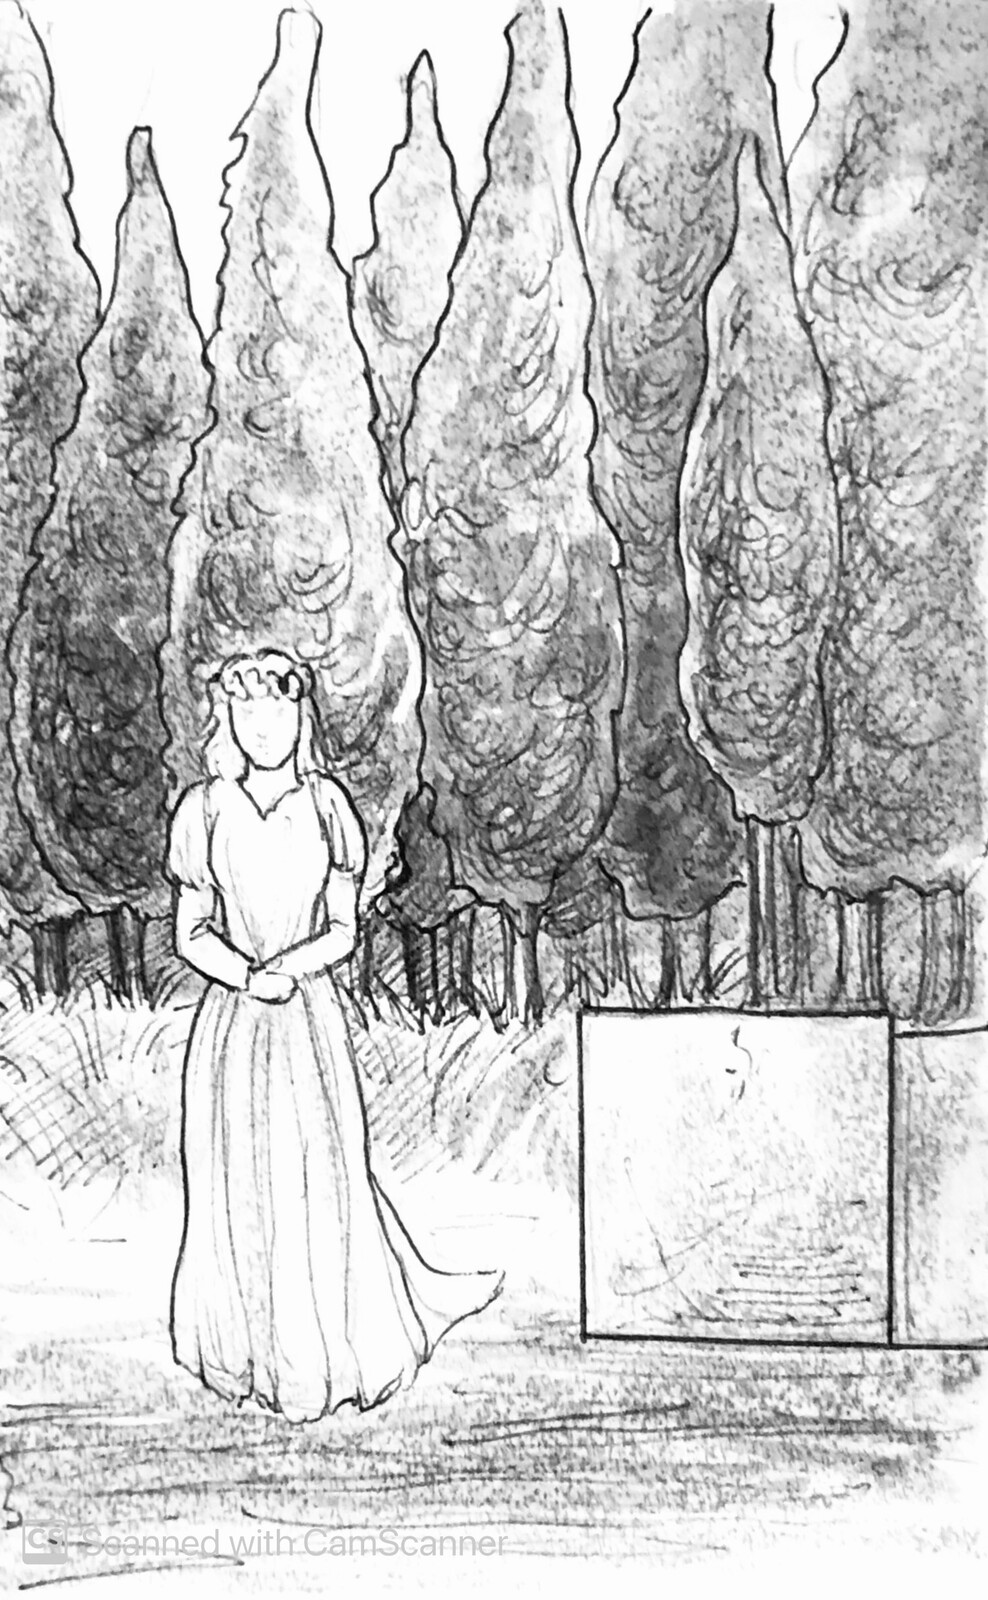 Final illustration in the novel, showing my character Malka Spitzer waiting for Joel